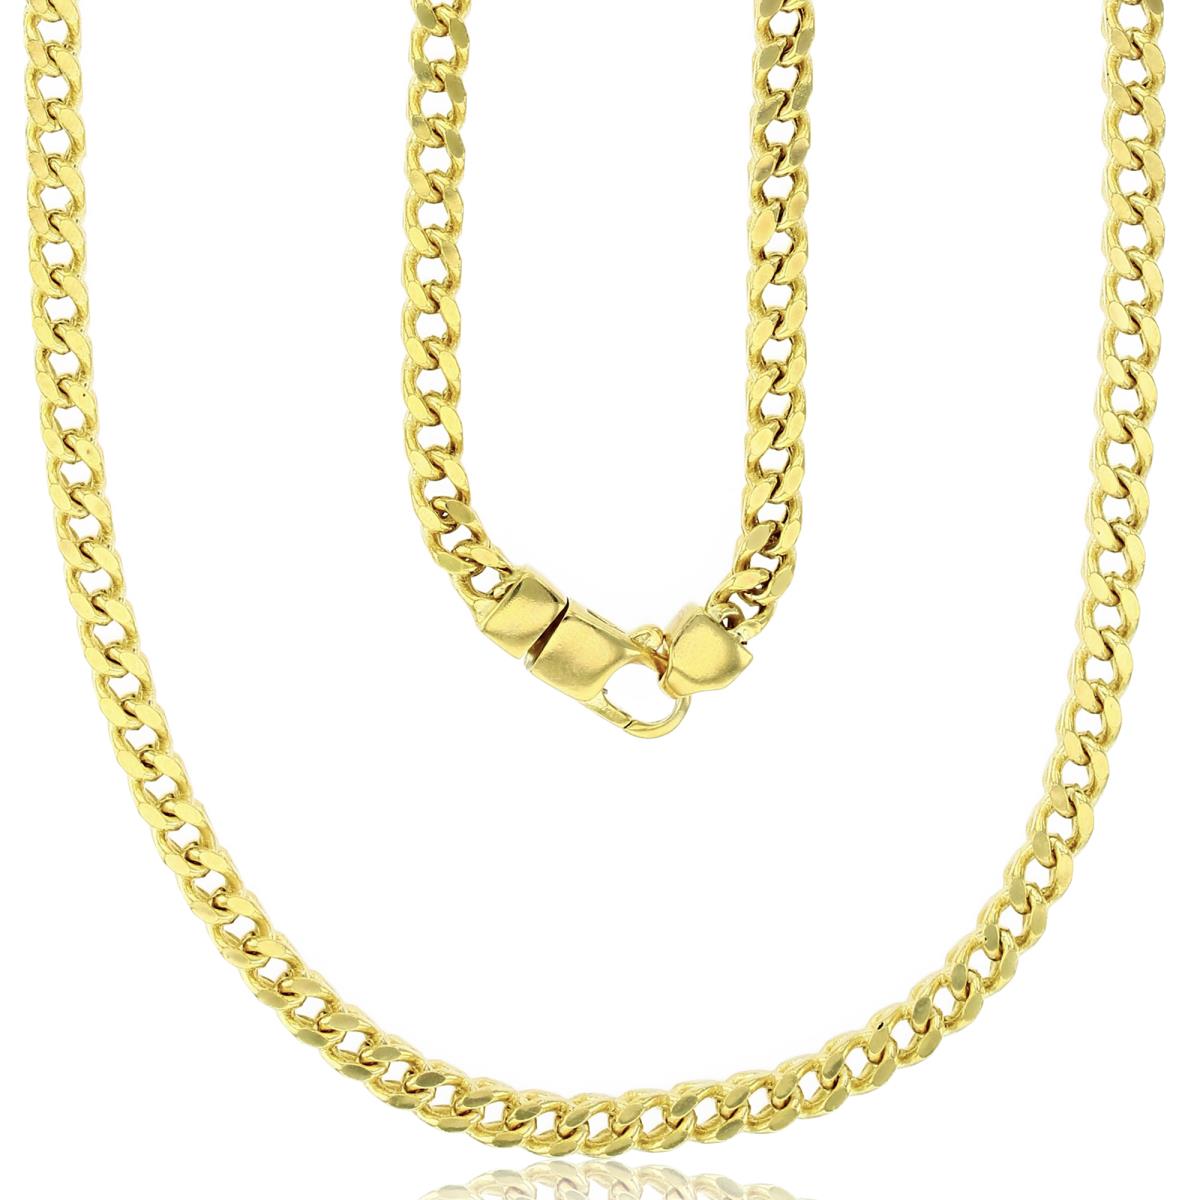 14K Yellow Gold 4.00mm 24" 120 Hollow Franco Chain